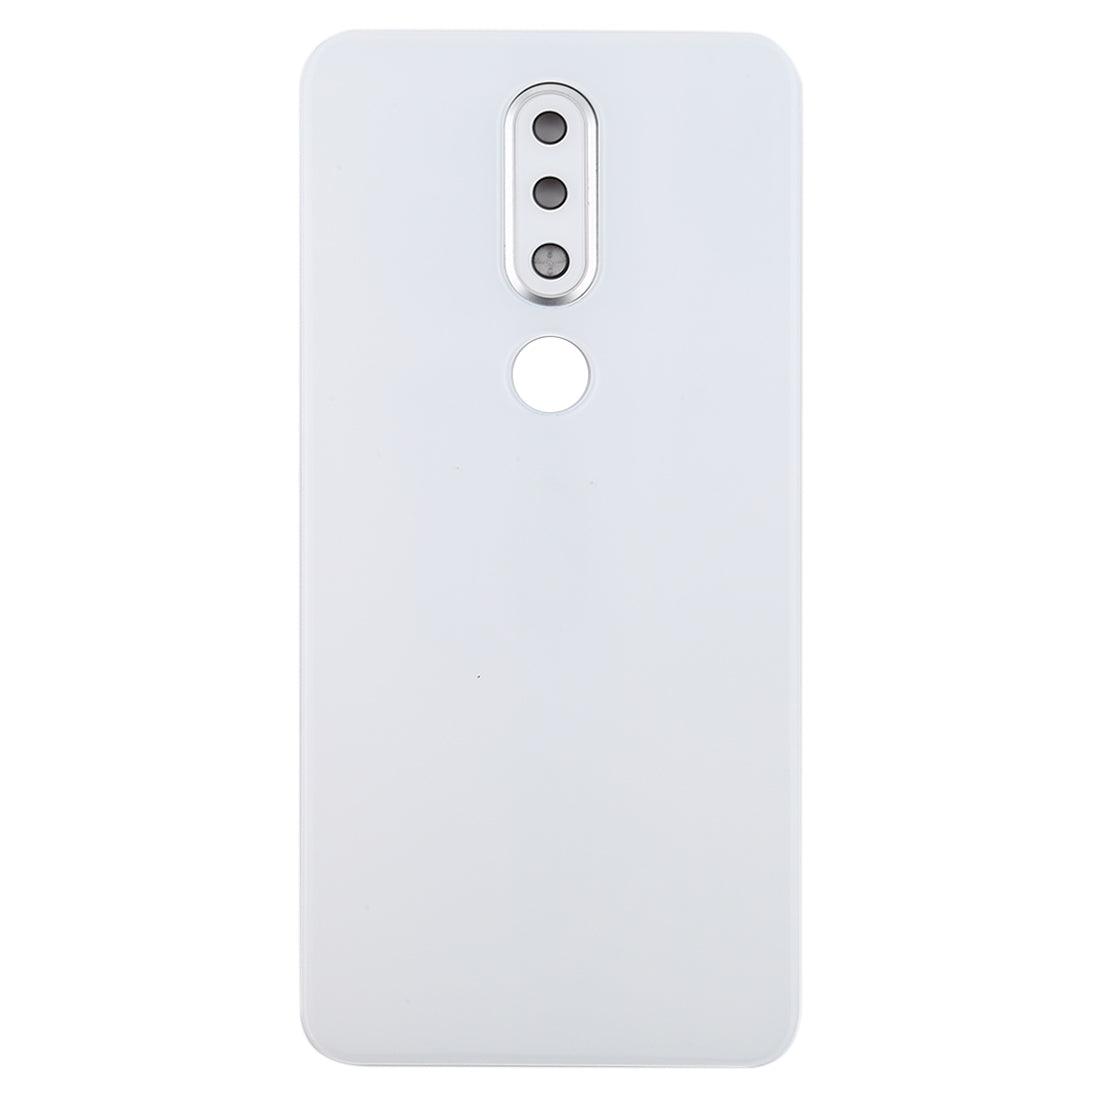 Back Glass Panel Housing Body for Nokia 6.1 Plus White with Camera Lens